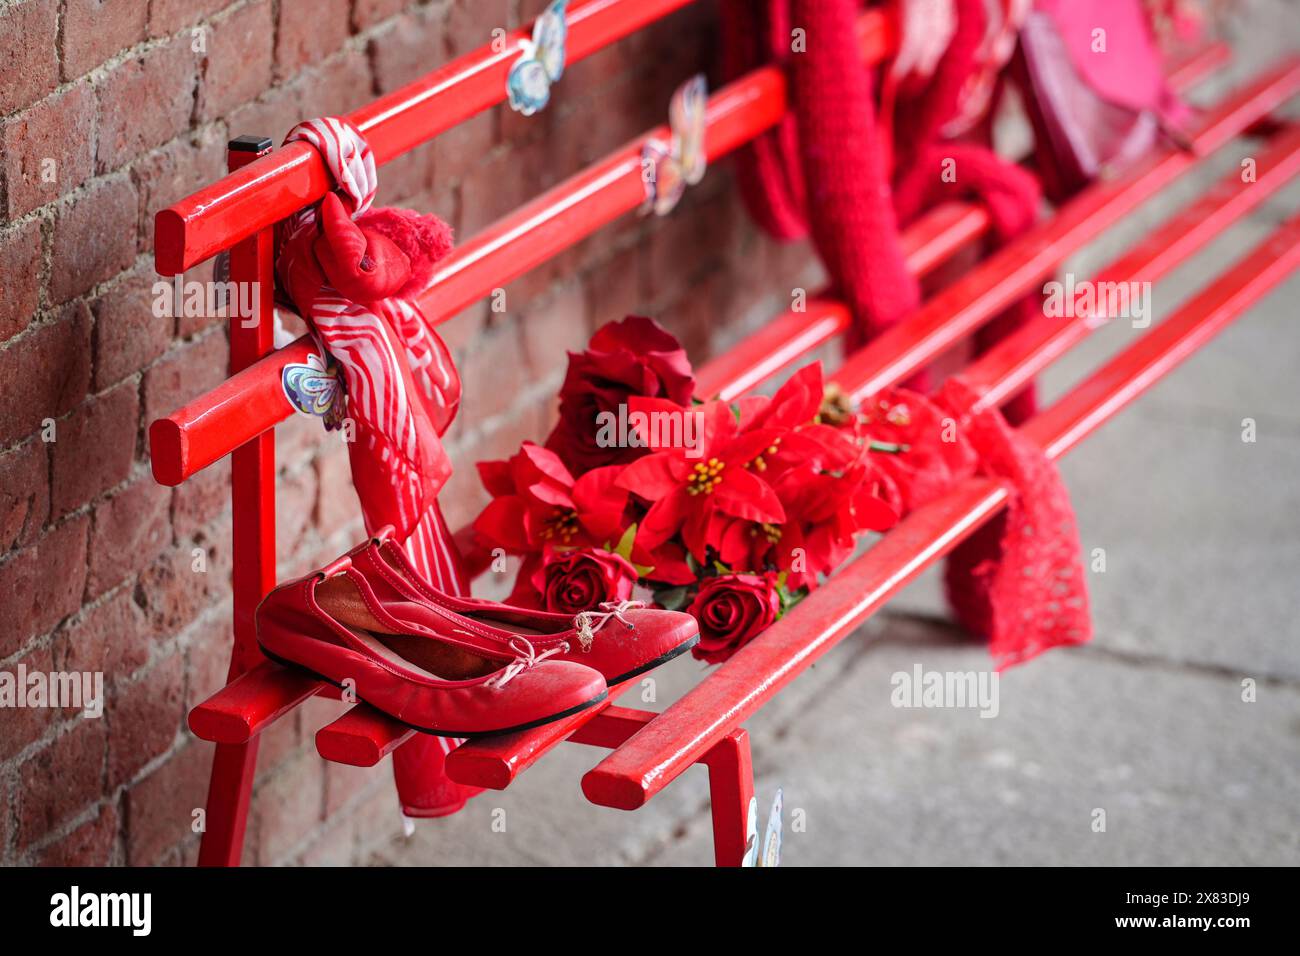 Red shoes on bench against violence against women Stock Photo